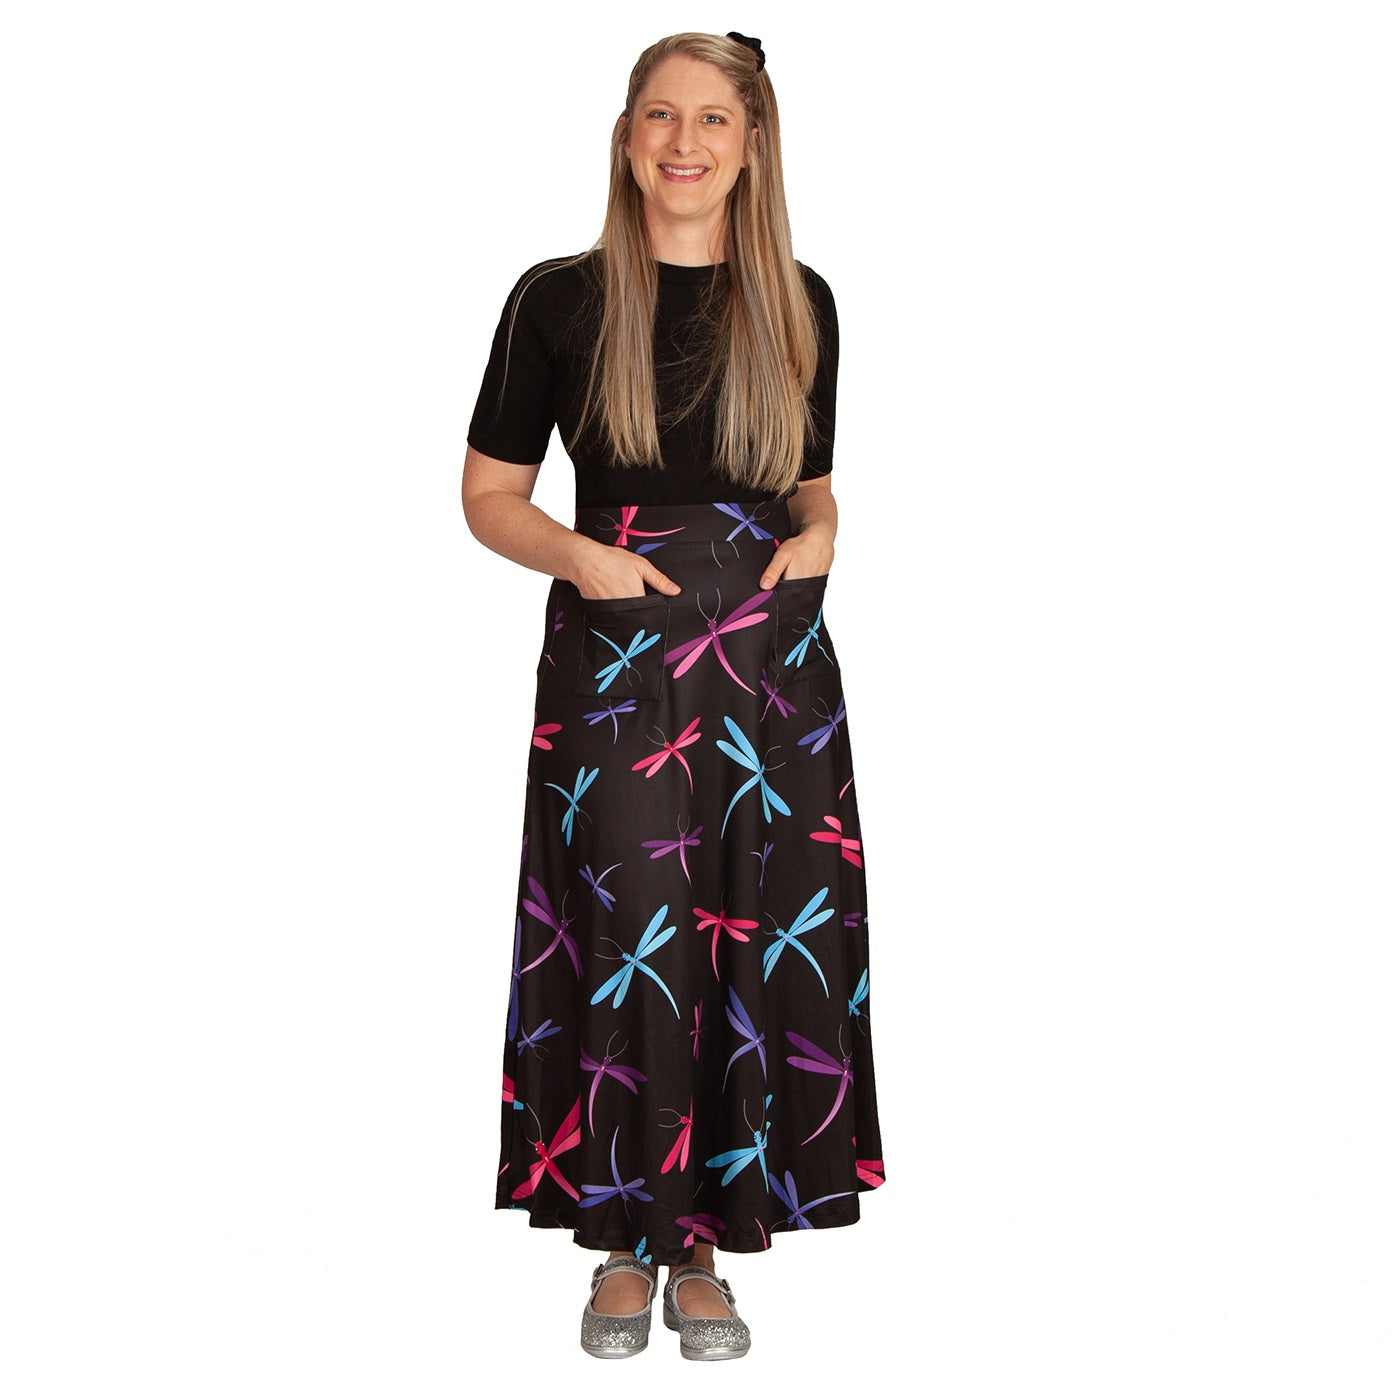 Midnight Dreaming Maxi Skirt by RainbowsAndFairies.com.au (Dragonfly - Firefly - Butterfly - Skirt With Pockets - Boho - Mod Retro - Vintage Inspired) - SKU: CL_MAXIS_DREAM_MID - Pic-05